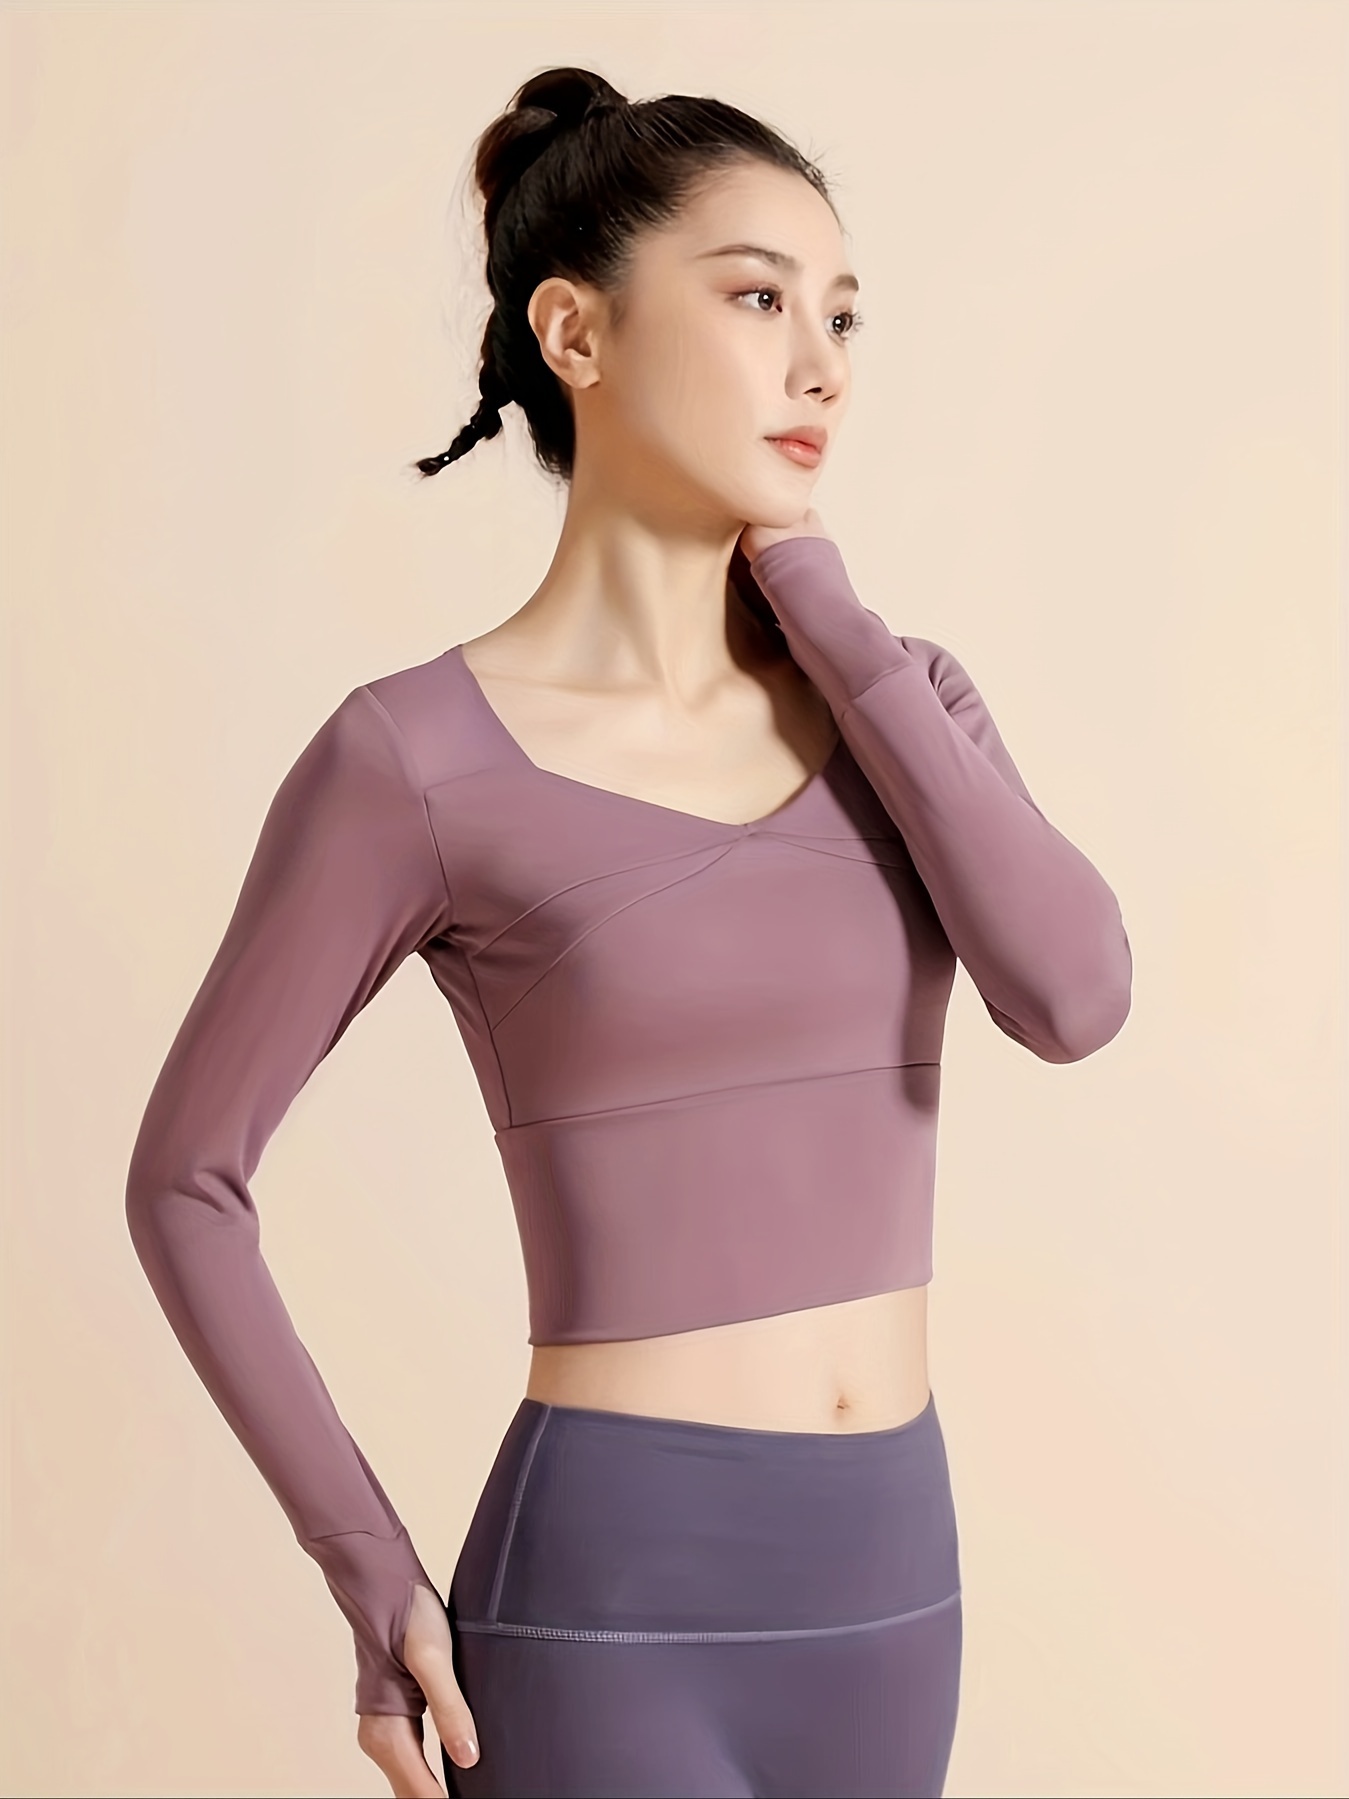 Women's Cropped Long Sleeve Shirts for Running & Yoga